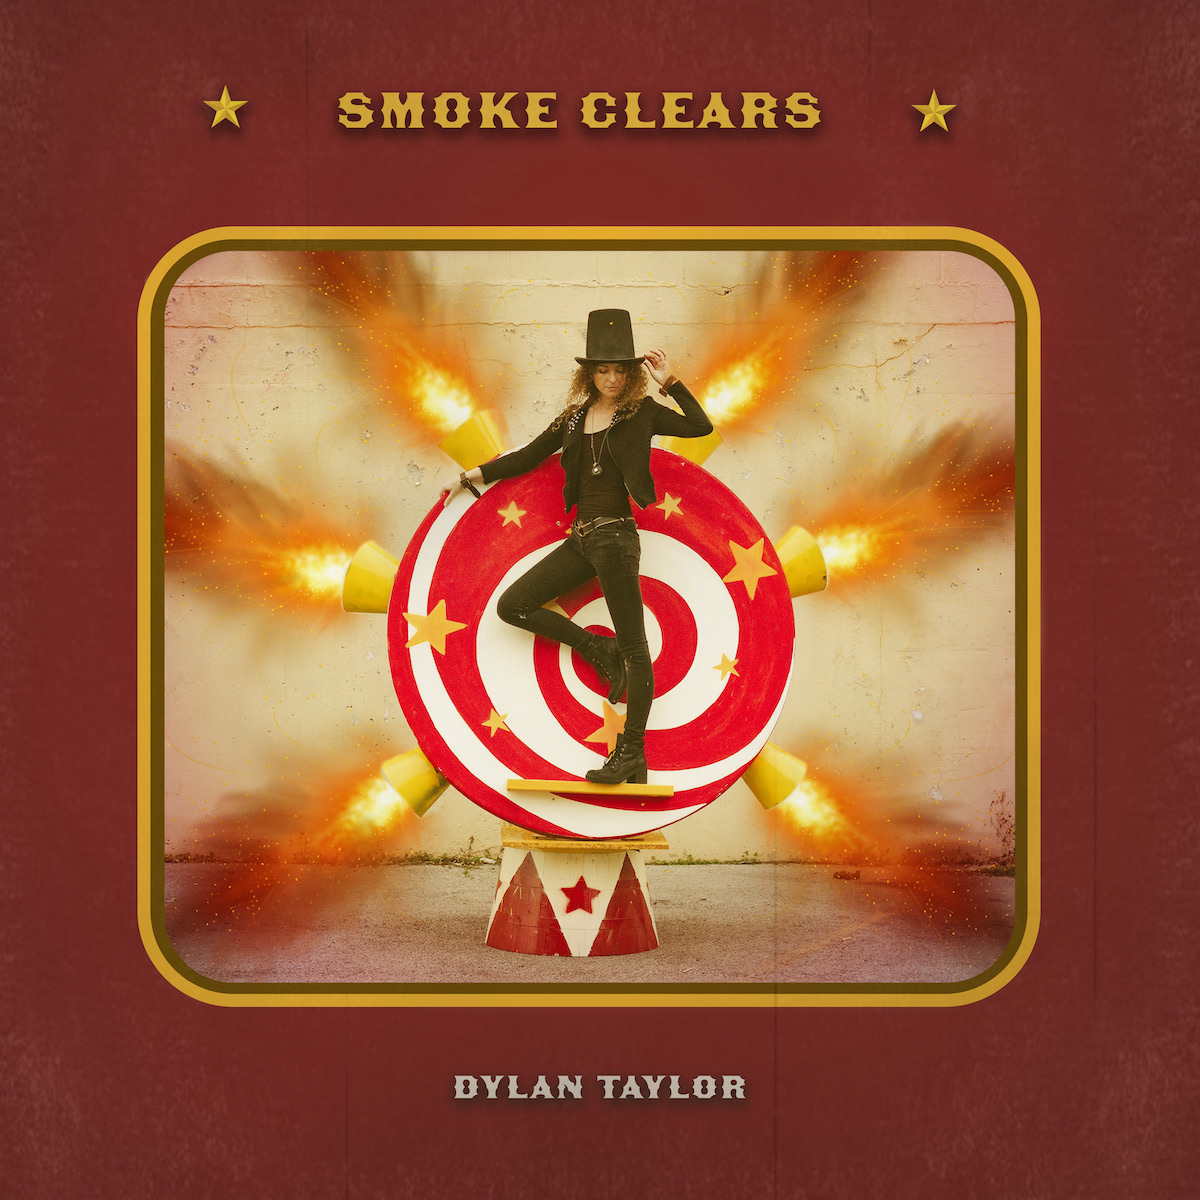 LISTEN: “Smoke Clears” by Dylan Taylor